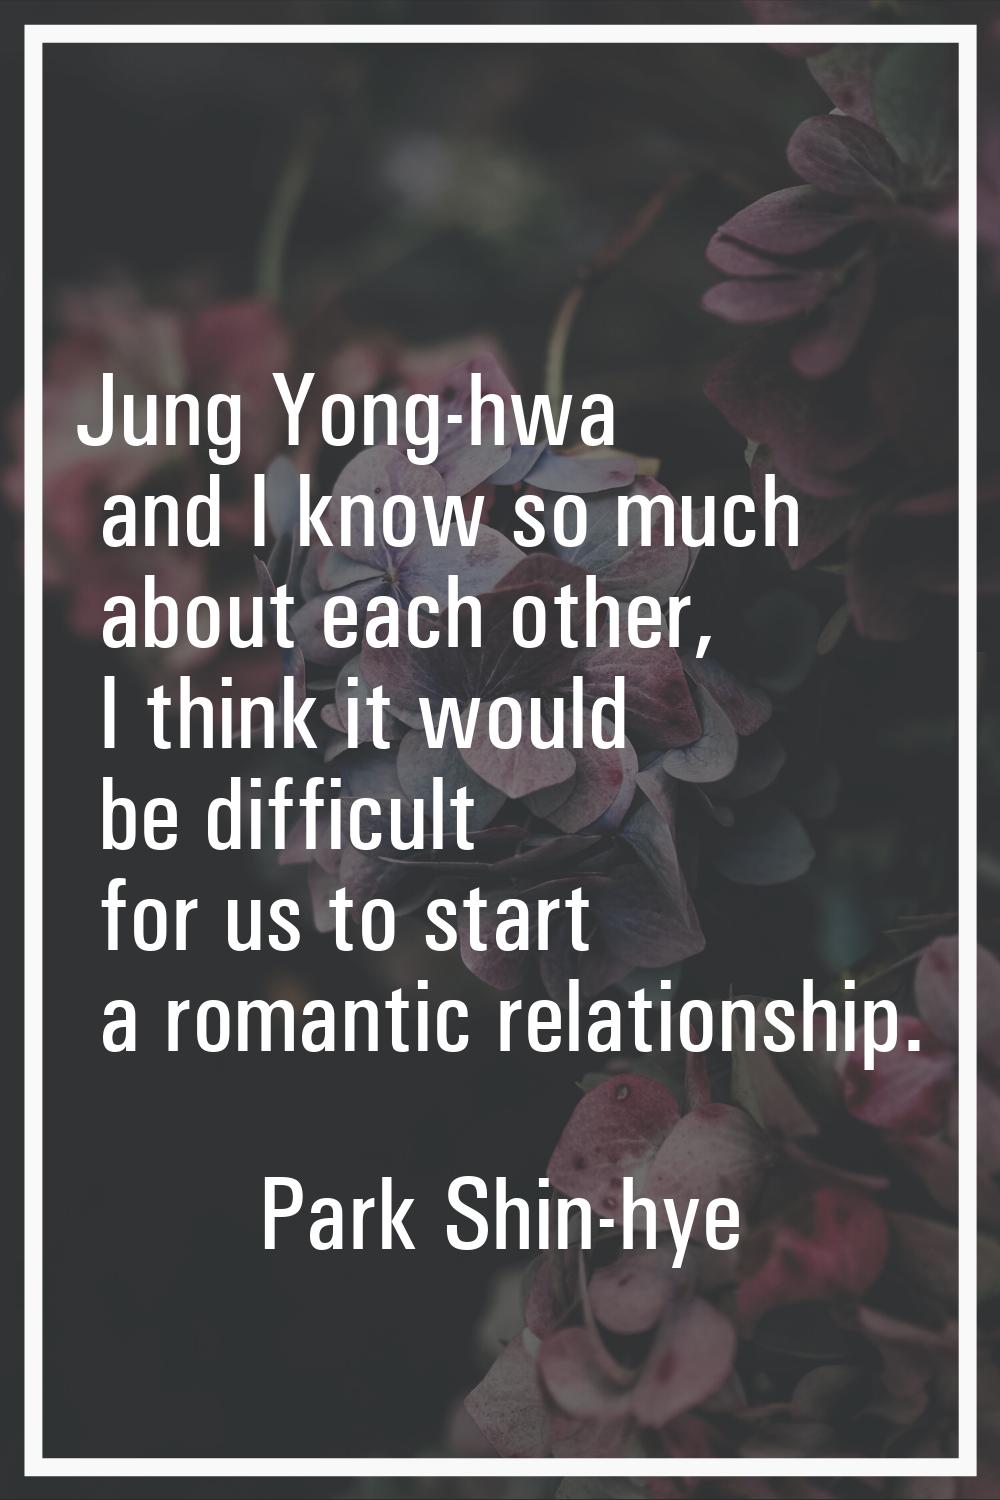 Jung Yong-hwa and I know so much about each other, I think it would be difficult for us to start a 